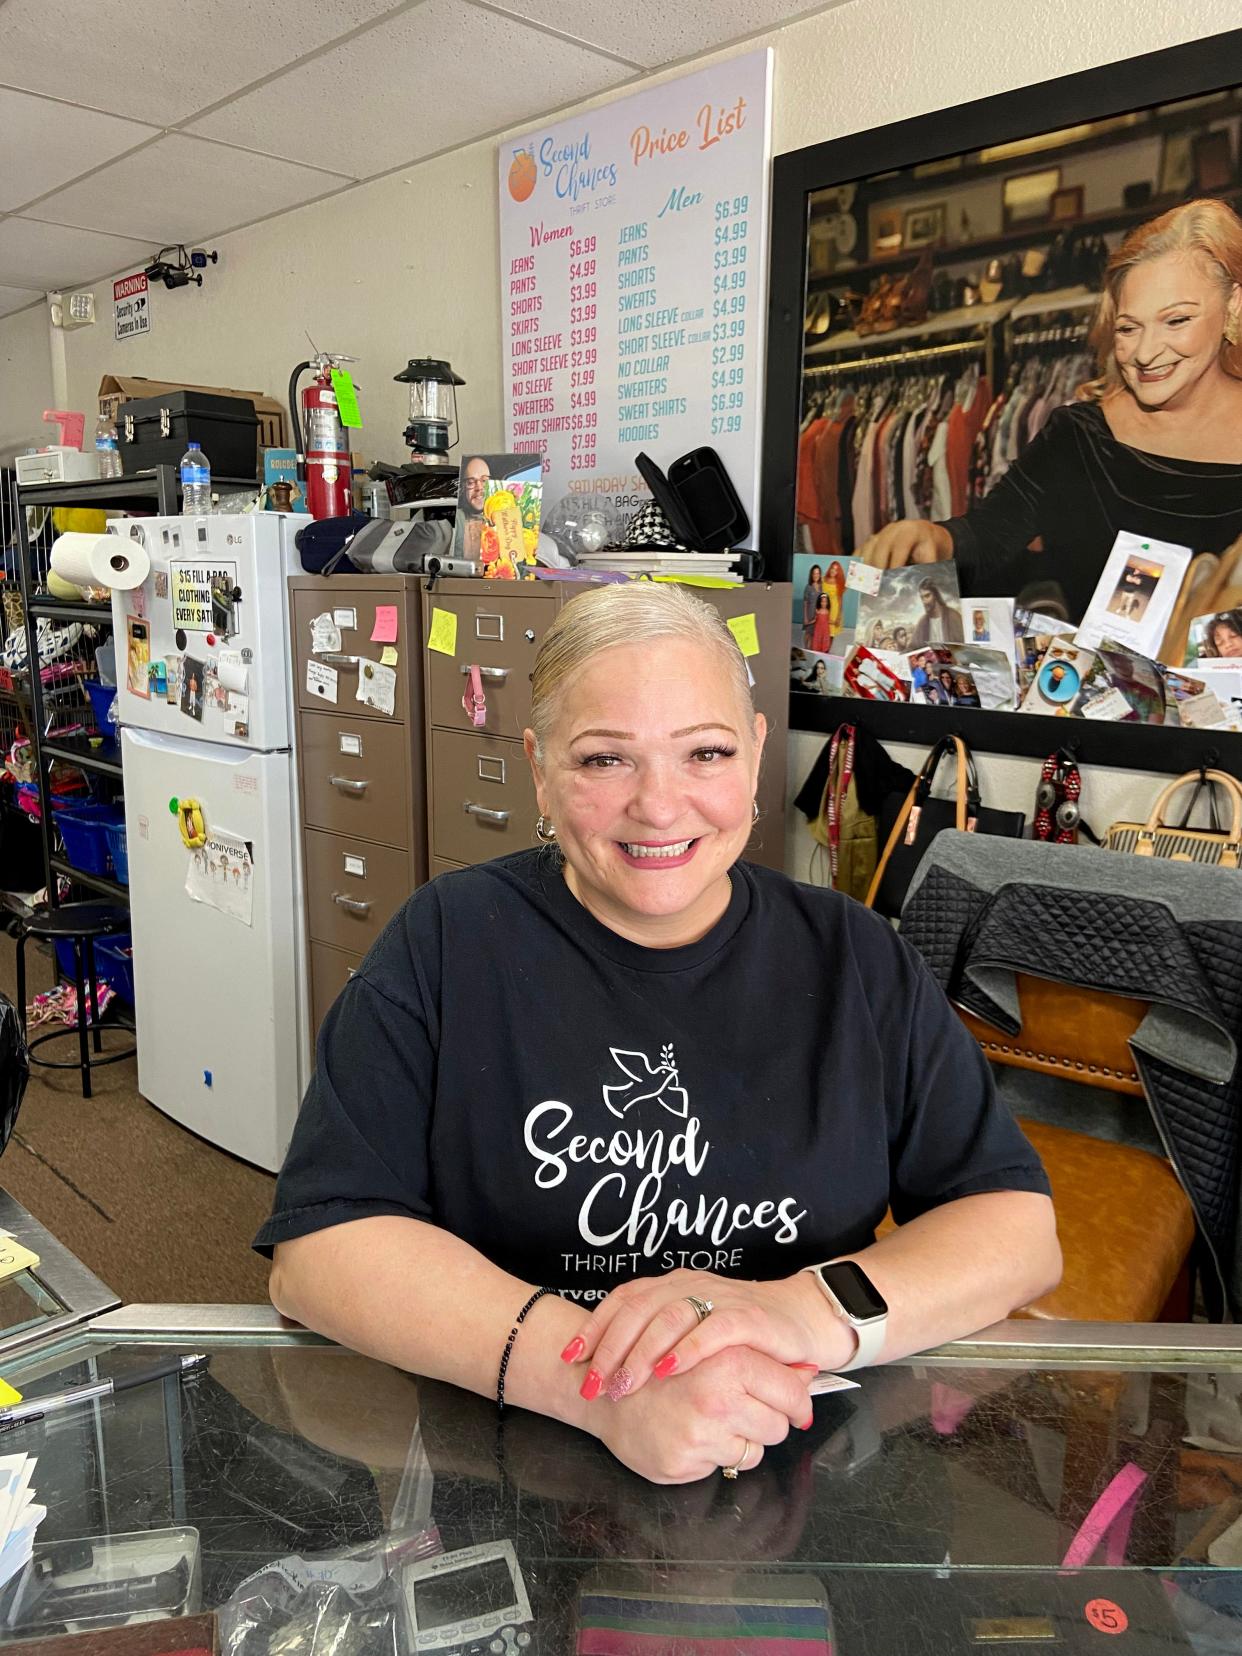 Delisa Jones, owner and founder of Second Chances Thrift Store ministry, stands recently at the counter of the ministry's Oklahoma City store at 2605 N MacArthur Blvd.